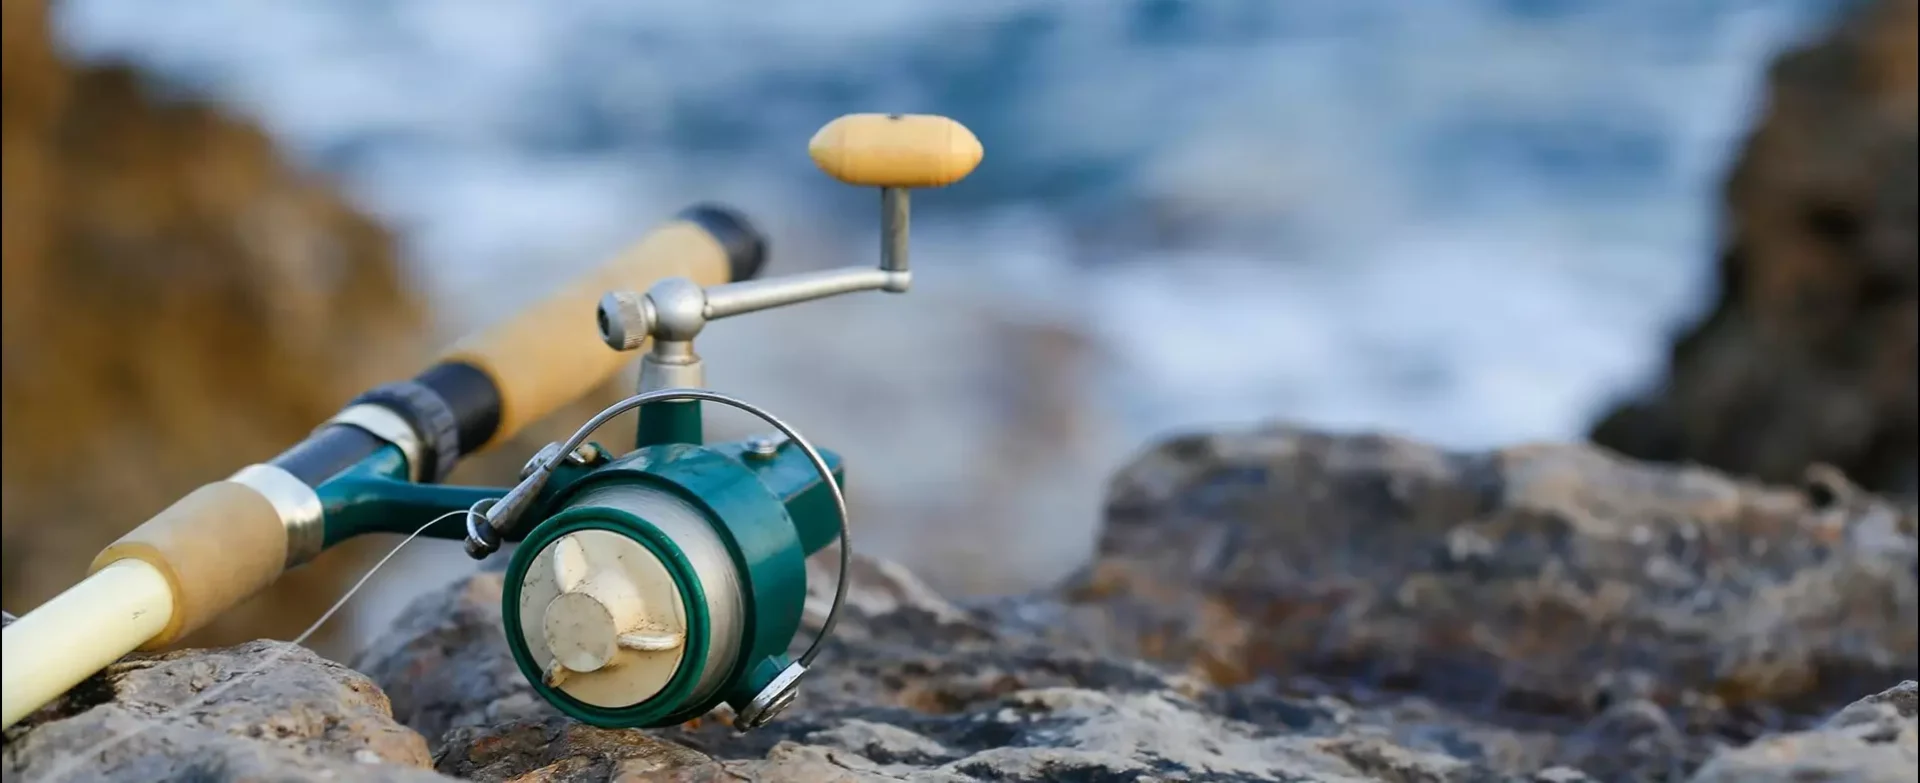 A fishing rod and reel on the rocks near water.